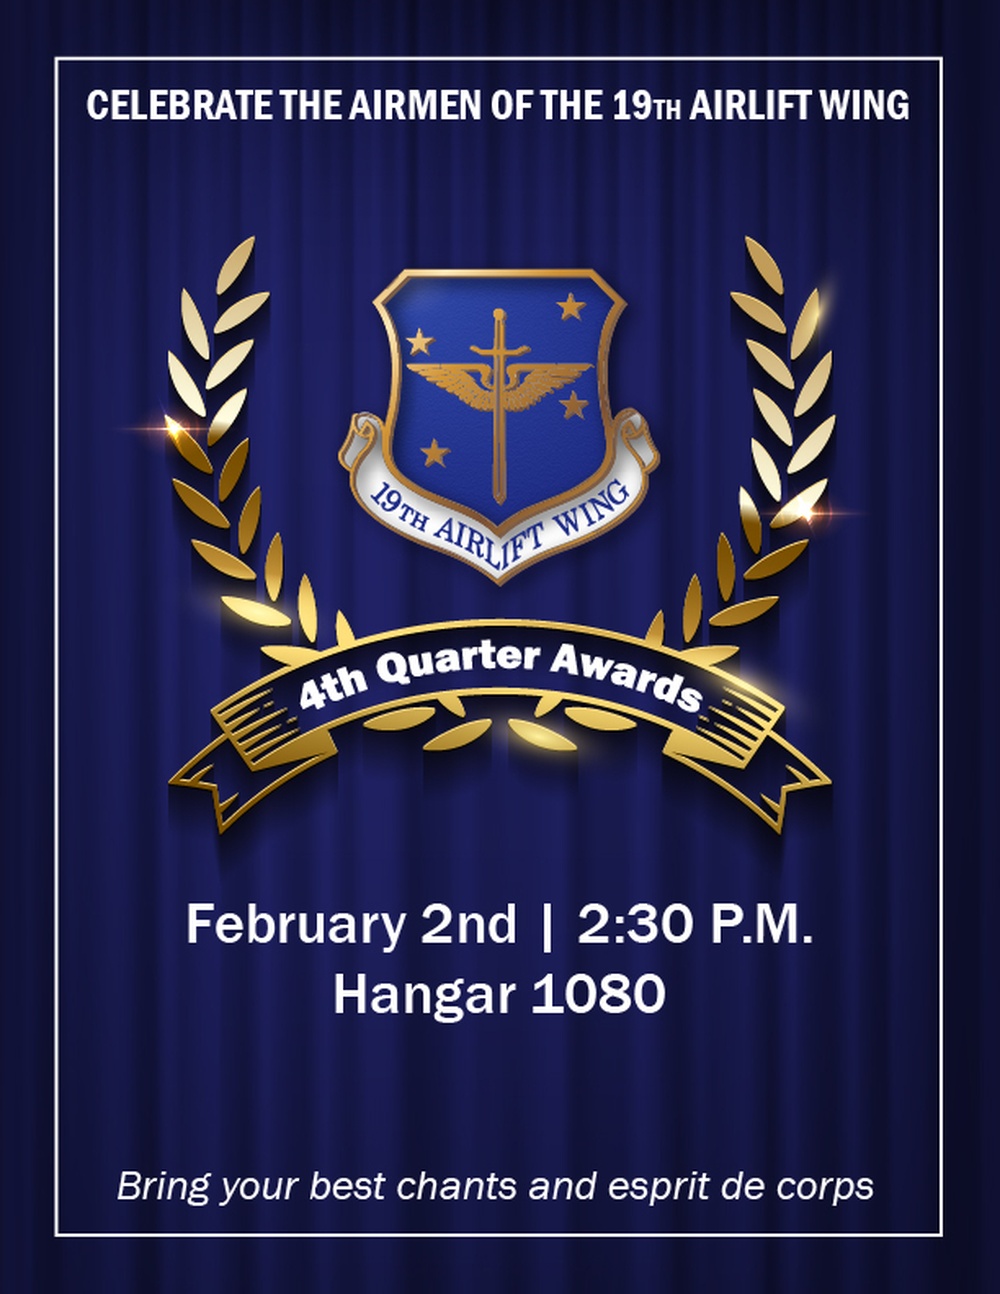 Celebrating Airmen of the 19th Airlift Wing